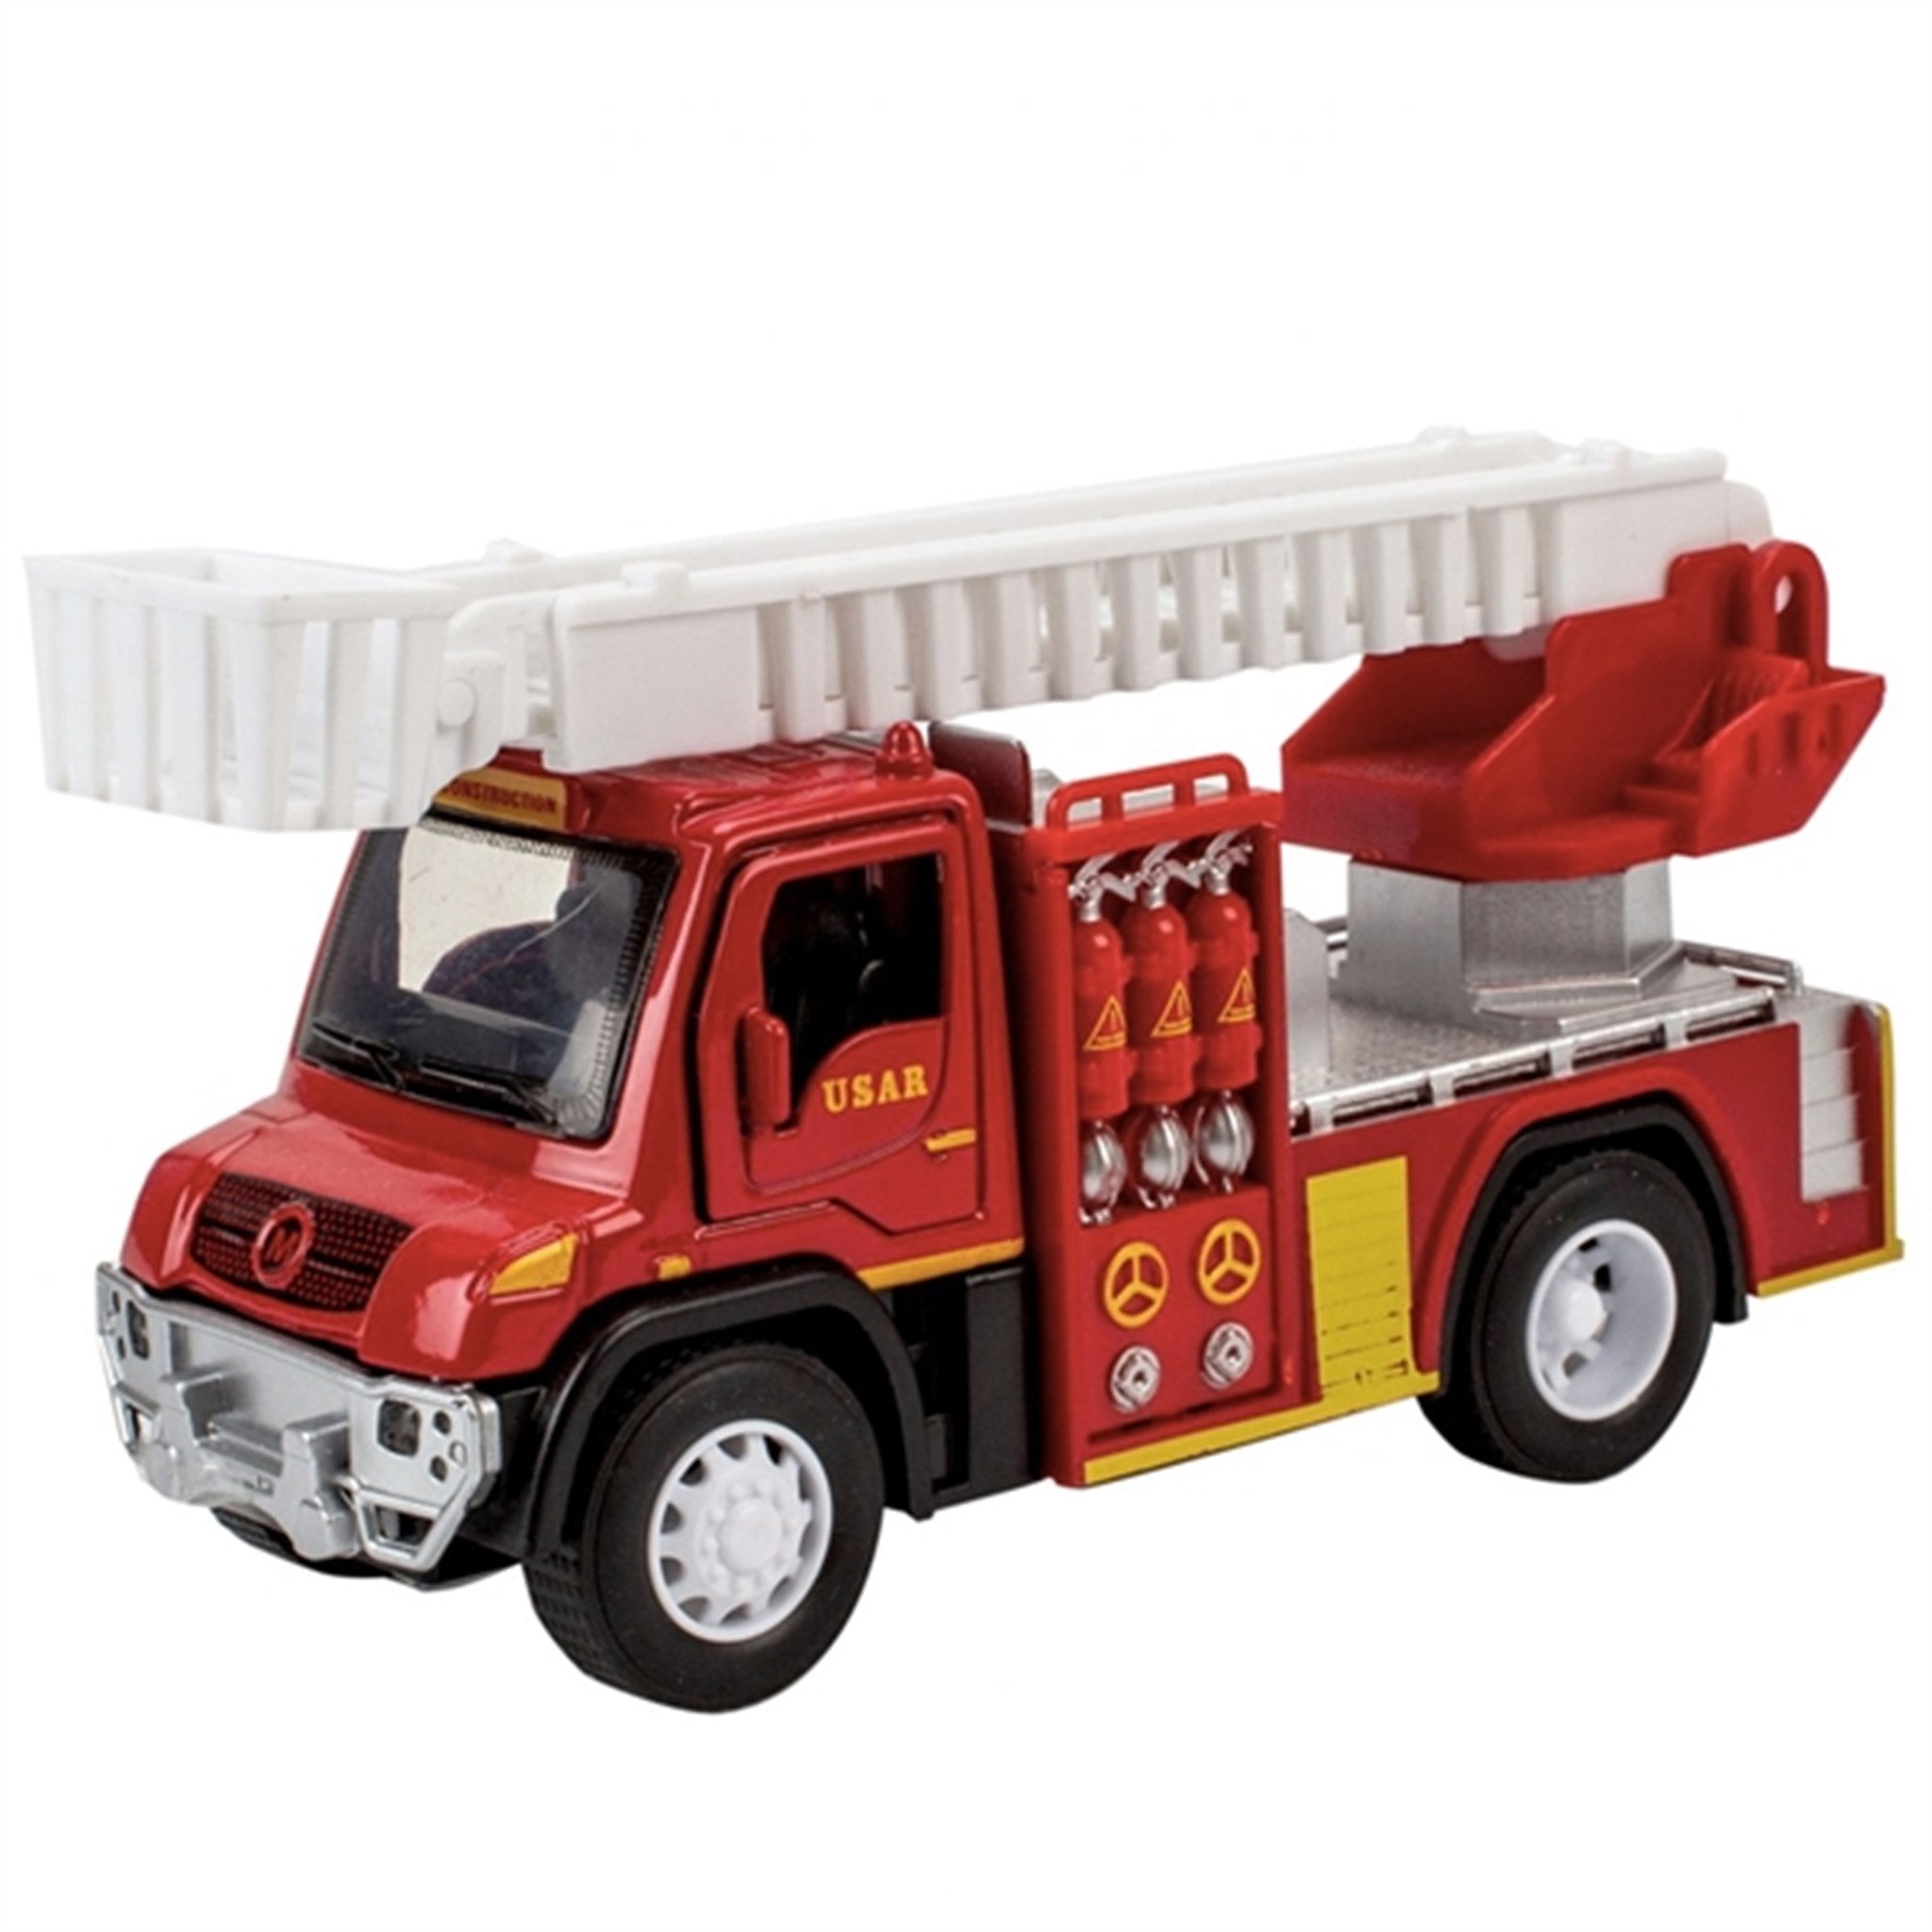 Magni Fire Truck With Light And Sound 1